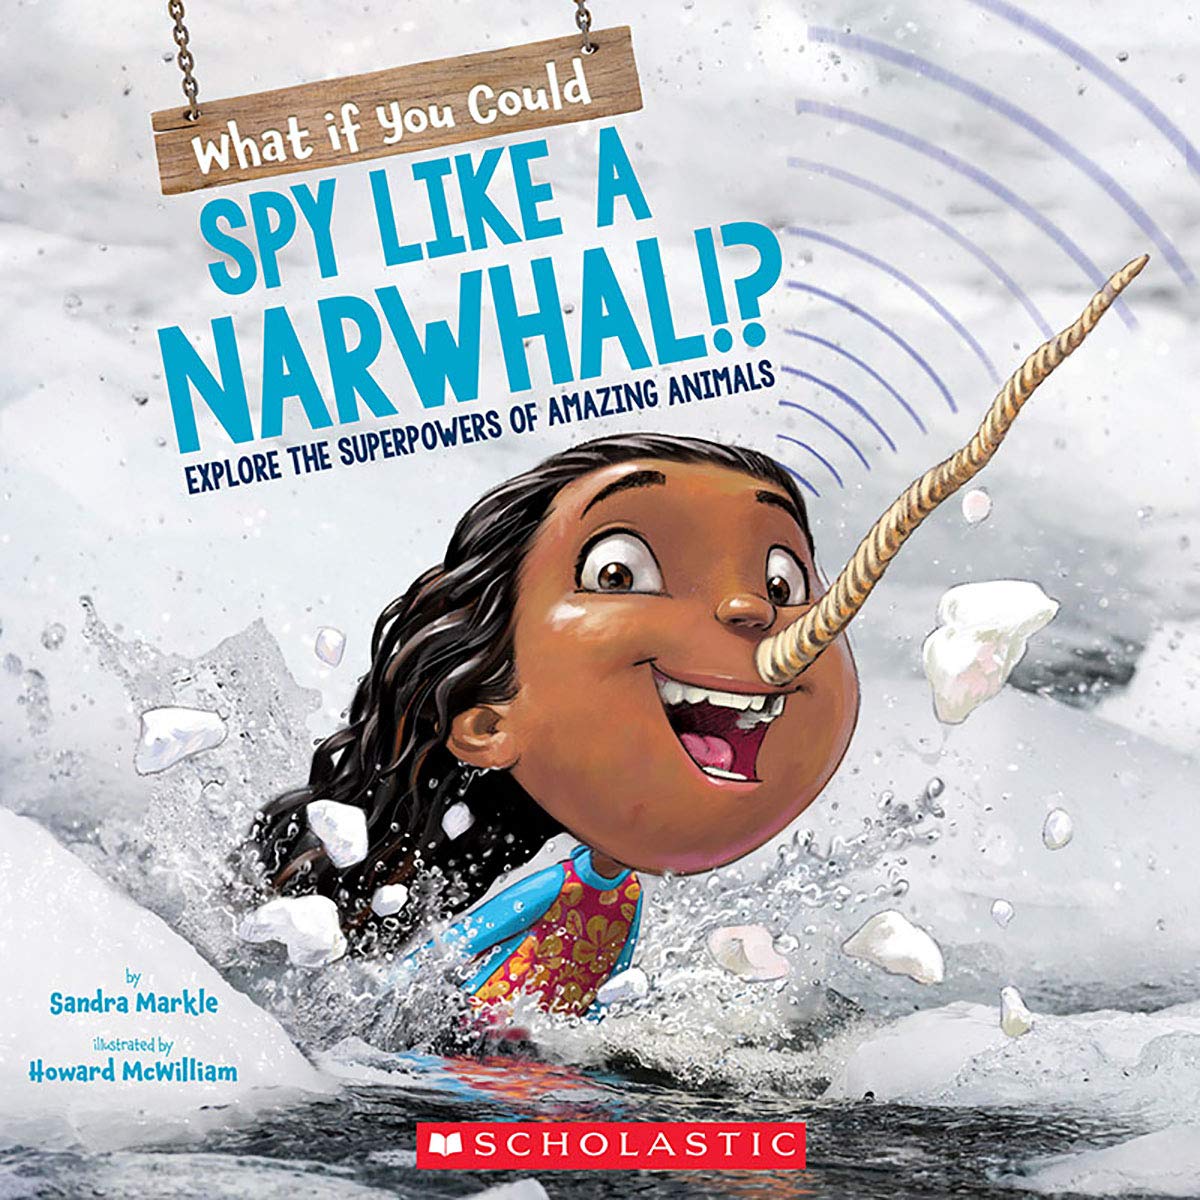 What if you could spy like a narwhal!? : explore the superpowers of amazing animals 책표지